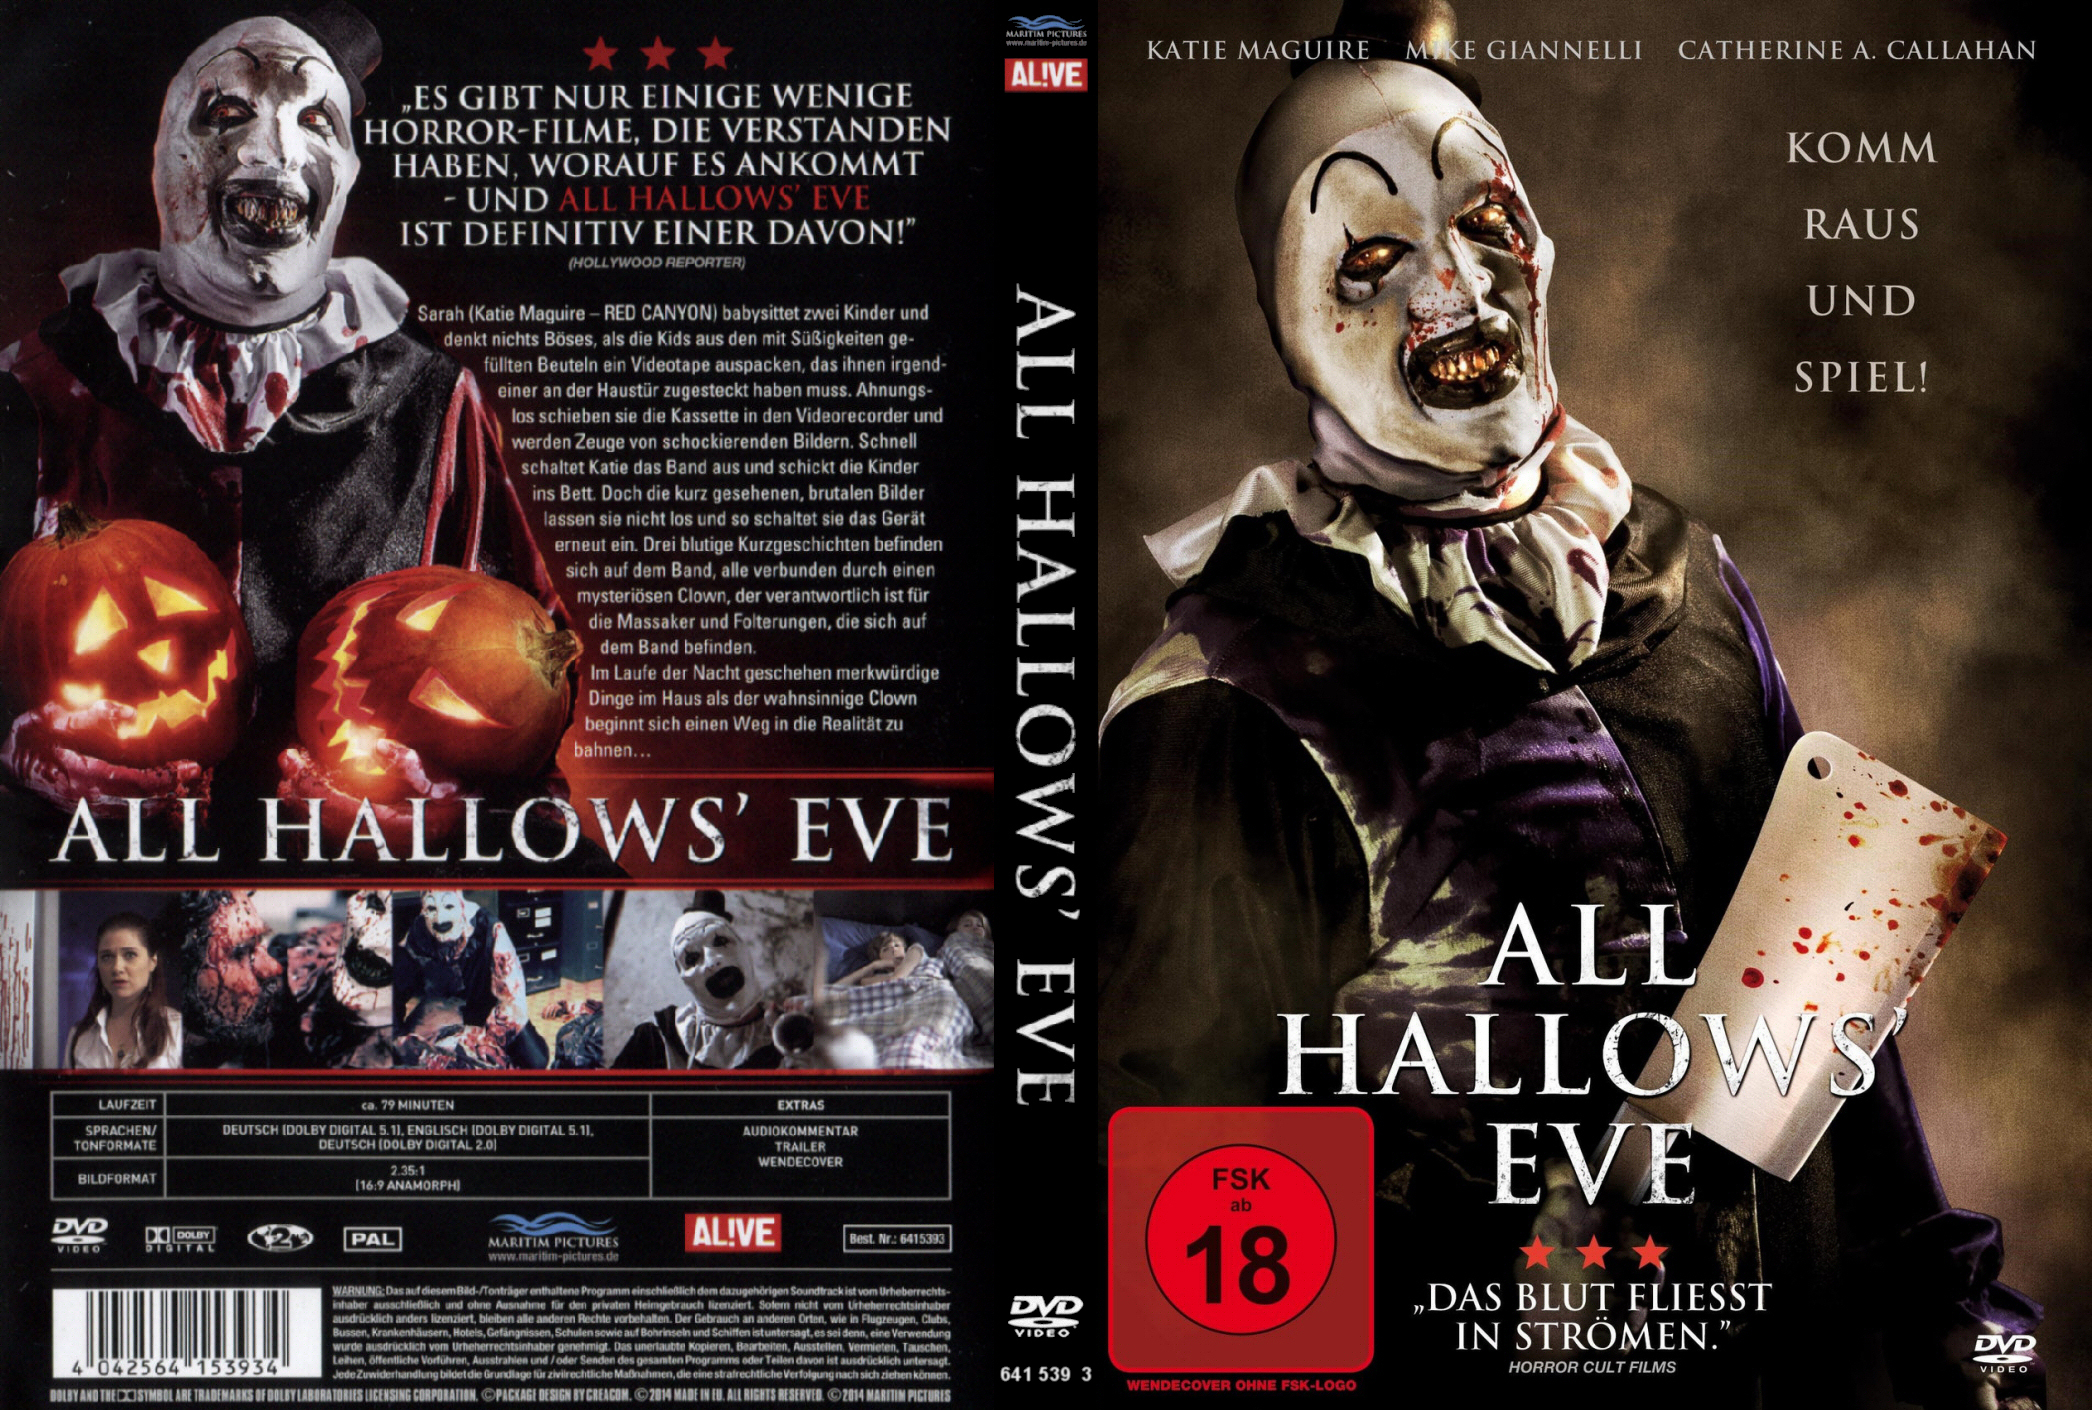 The Horrors of Halloween: ALL HALLOWS EVE (2013), ALL HALLOWS EVE 2 (2015)  & TERRIFIER (2016) Ads, VHS, DVD and Blu-ray Covers